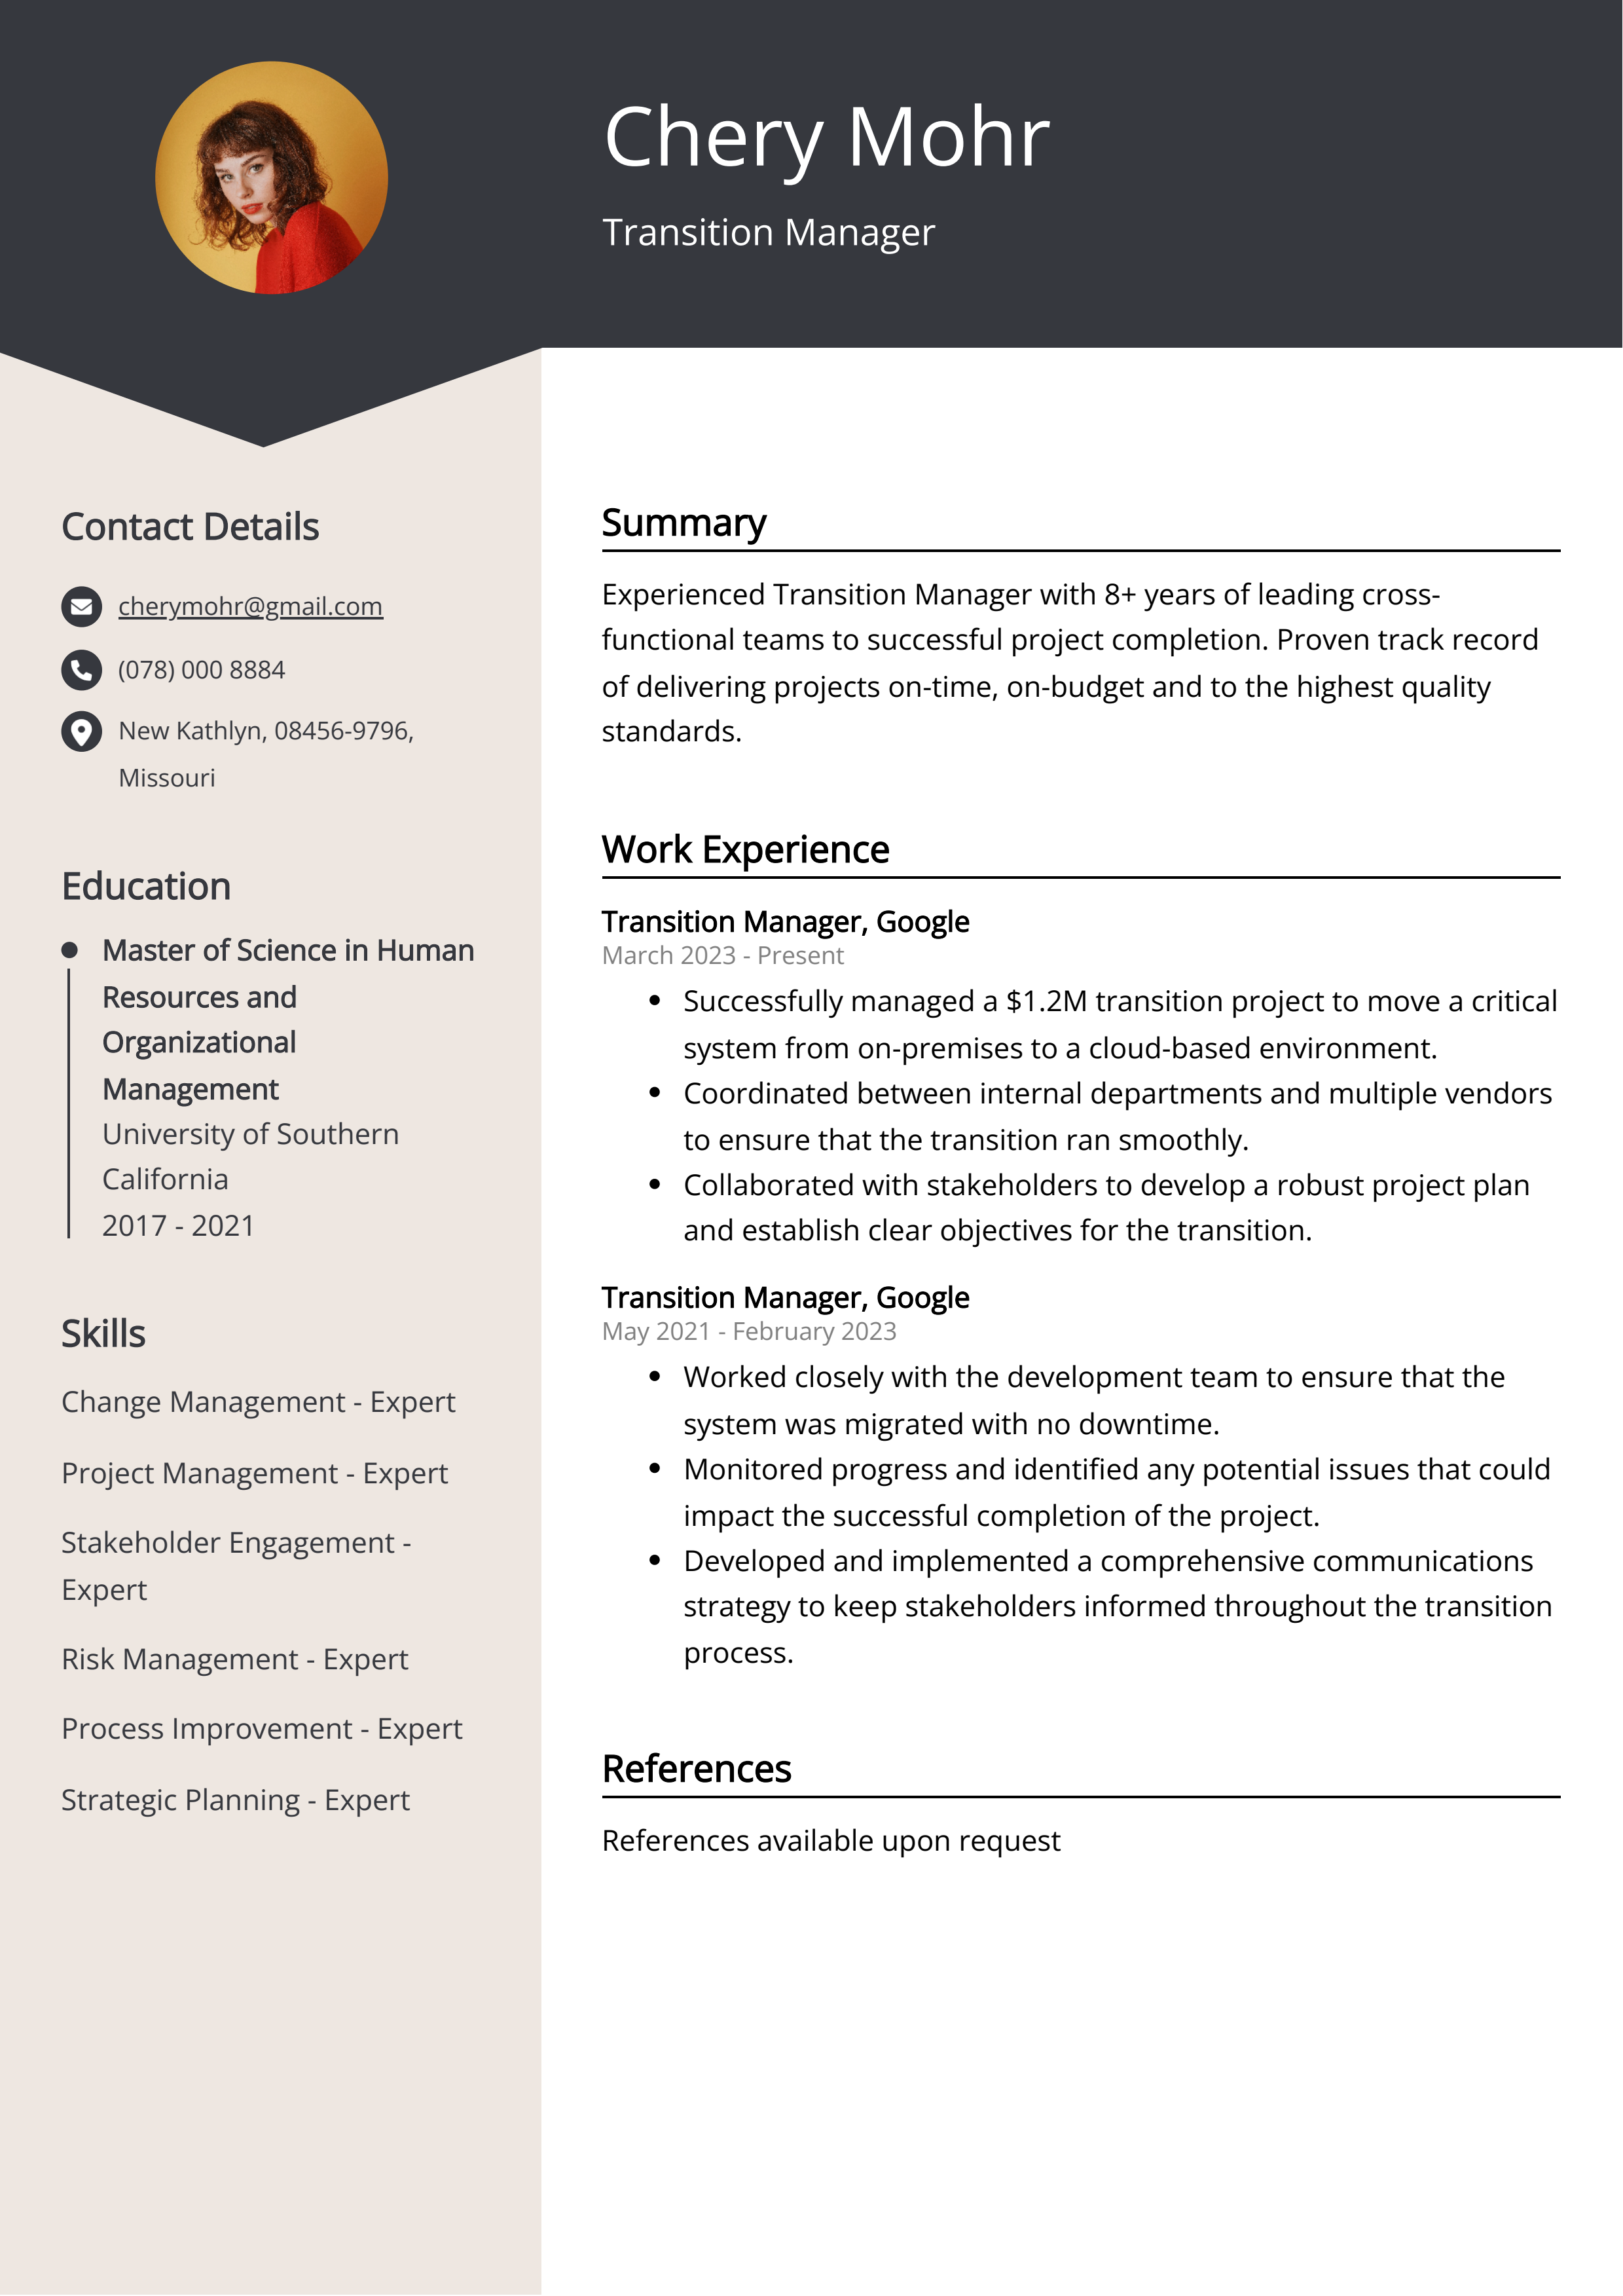 Transition Manager Resume Example